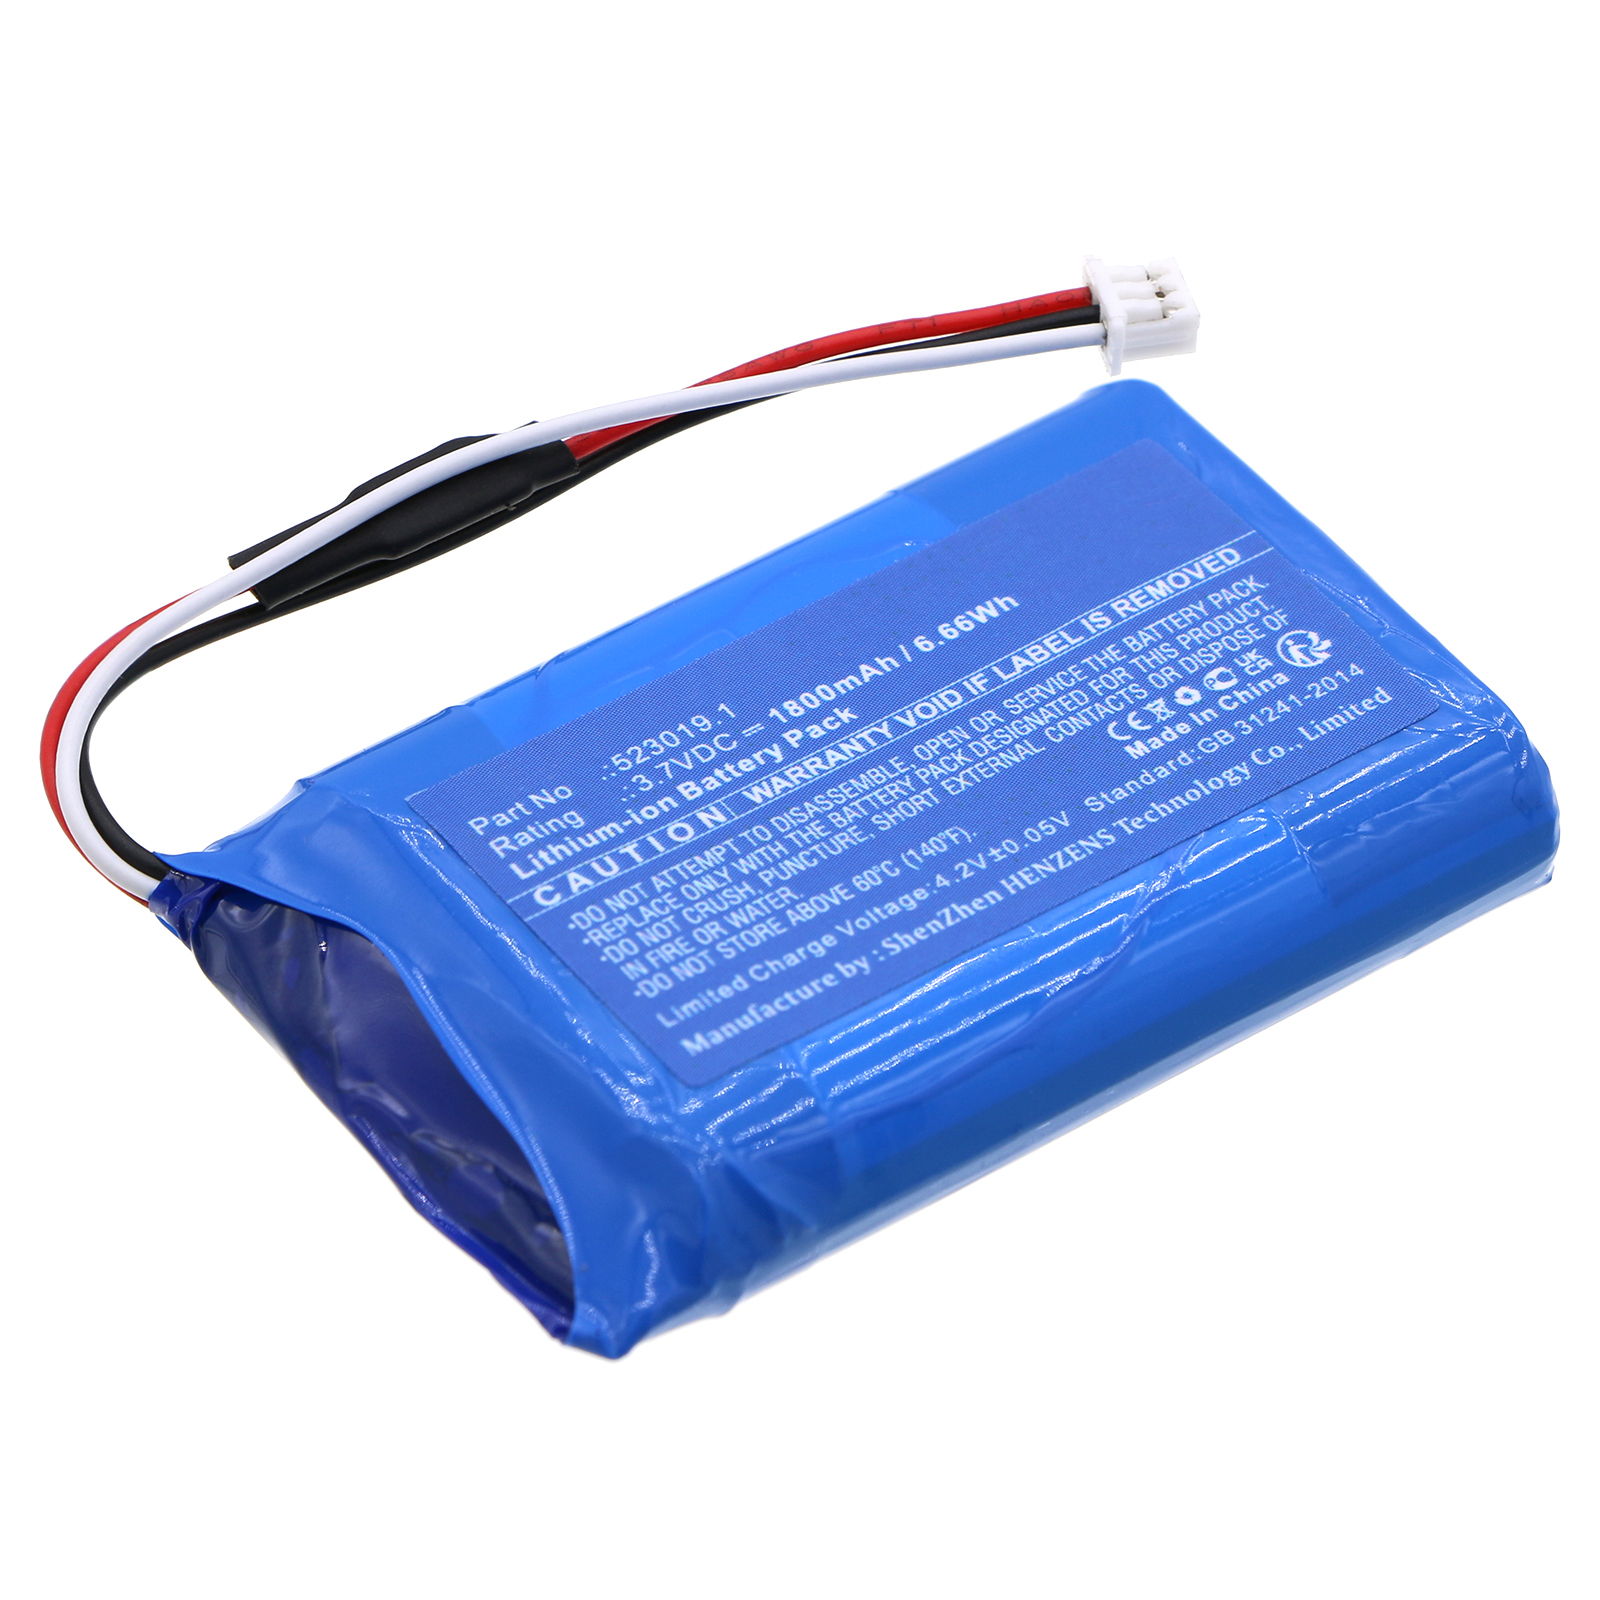 Synergy Digital Equipment Battery, Compatible with Systronik 523019.1 Equipment Battery (Li-ion, 3.7V, 1800mAh)